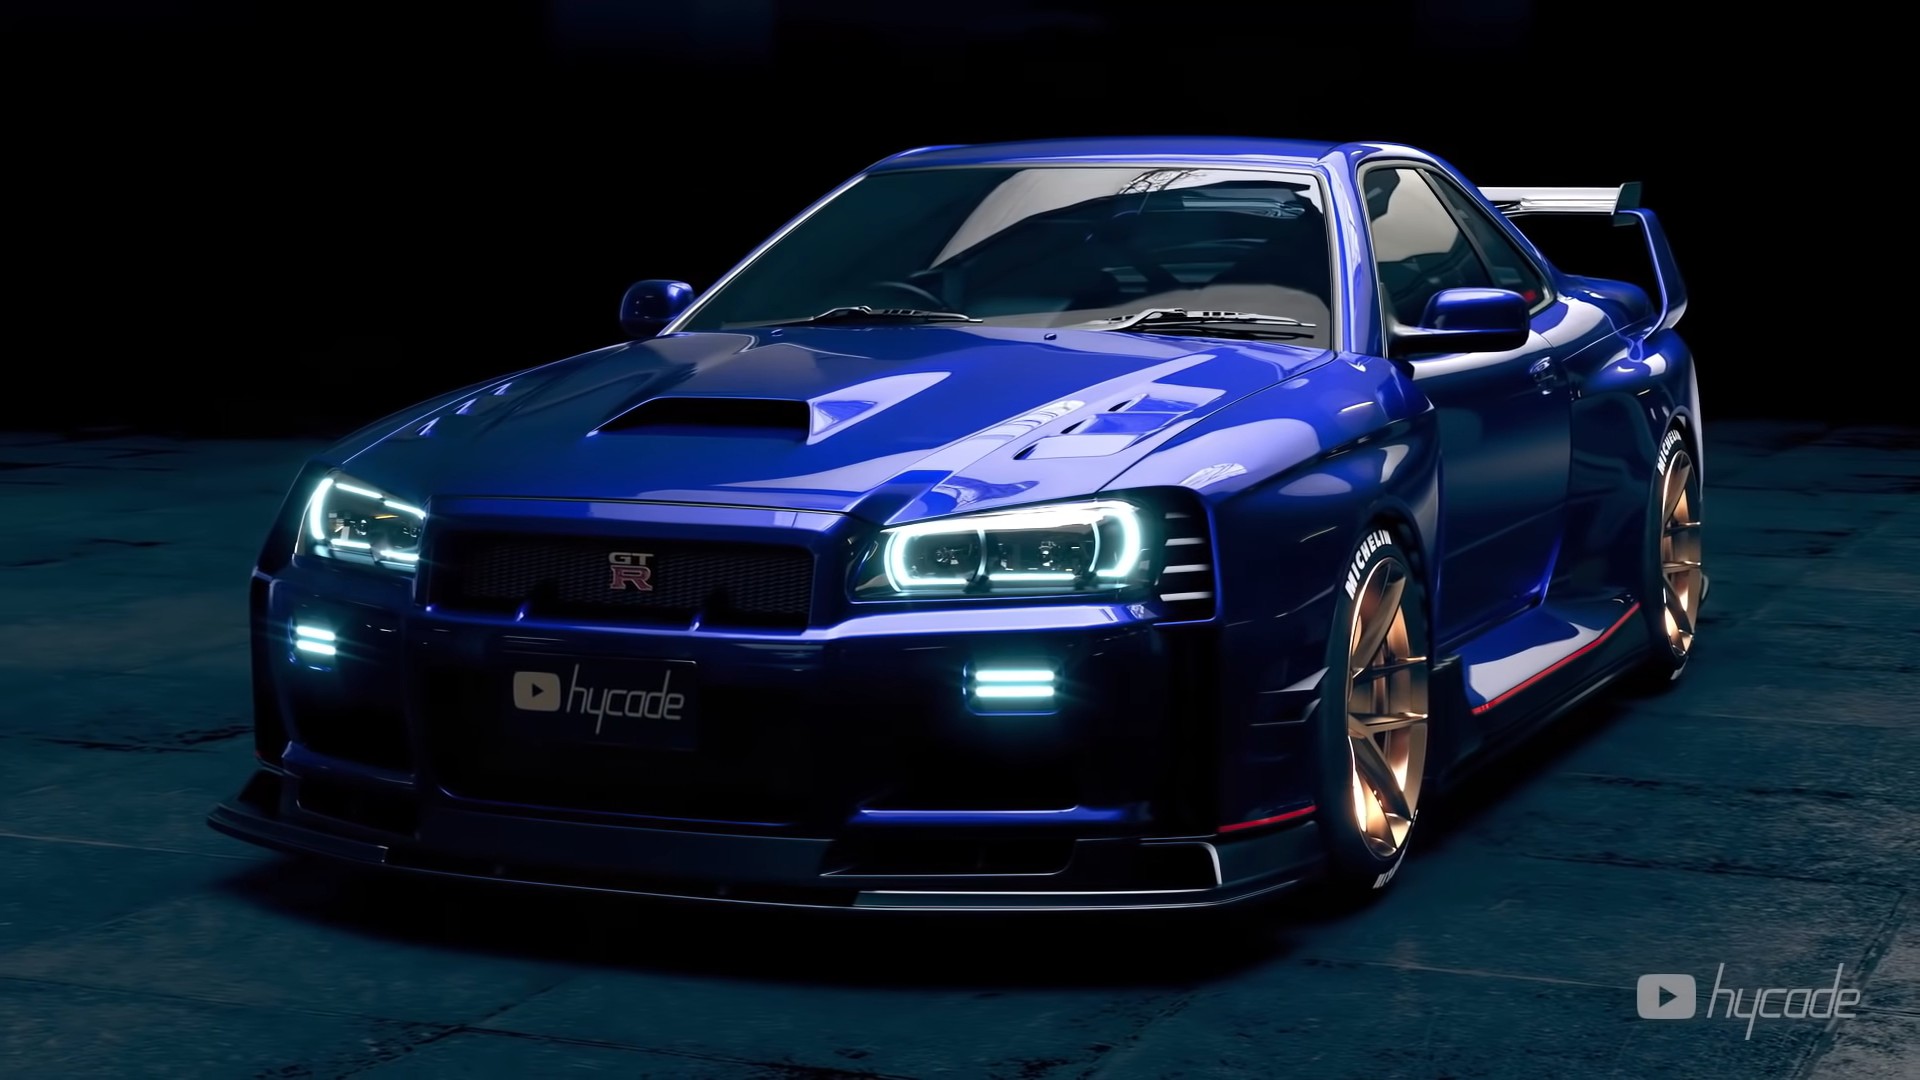 R34 Nissan Gt R Looks Like A Nismo Supercar In Glossy Widebody